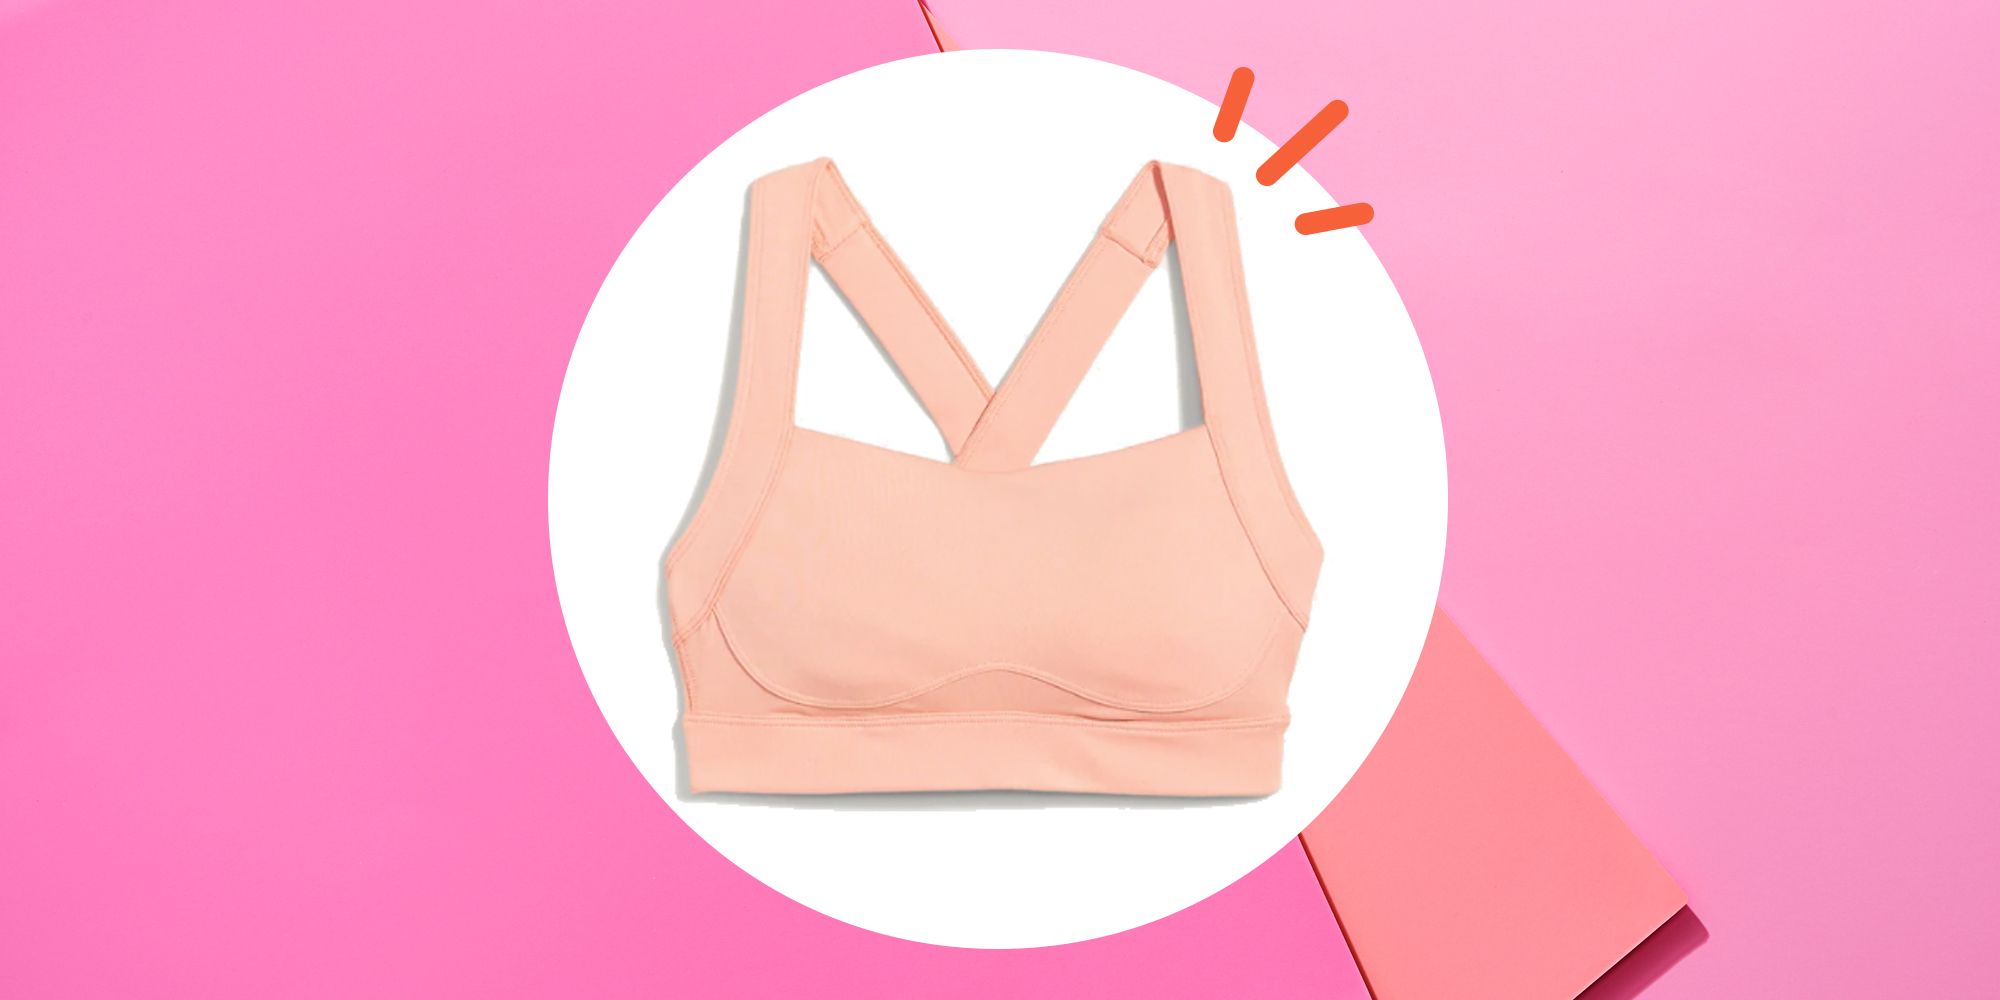 Here's where to find cheap workout clothes that are actually high-quality